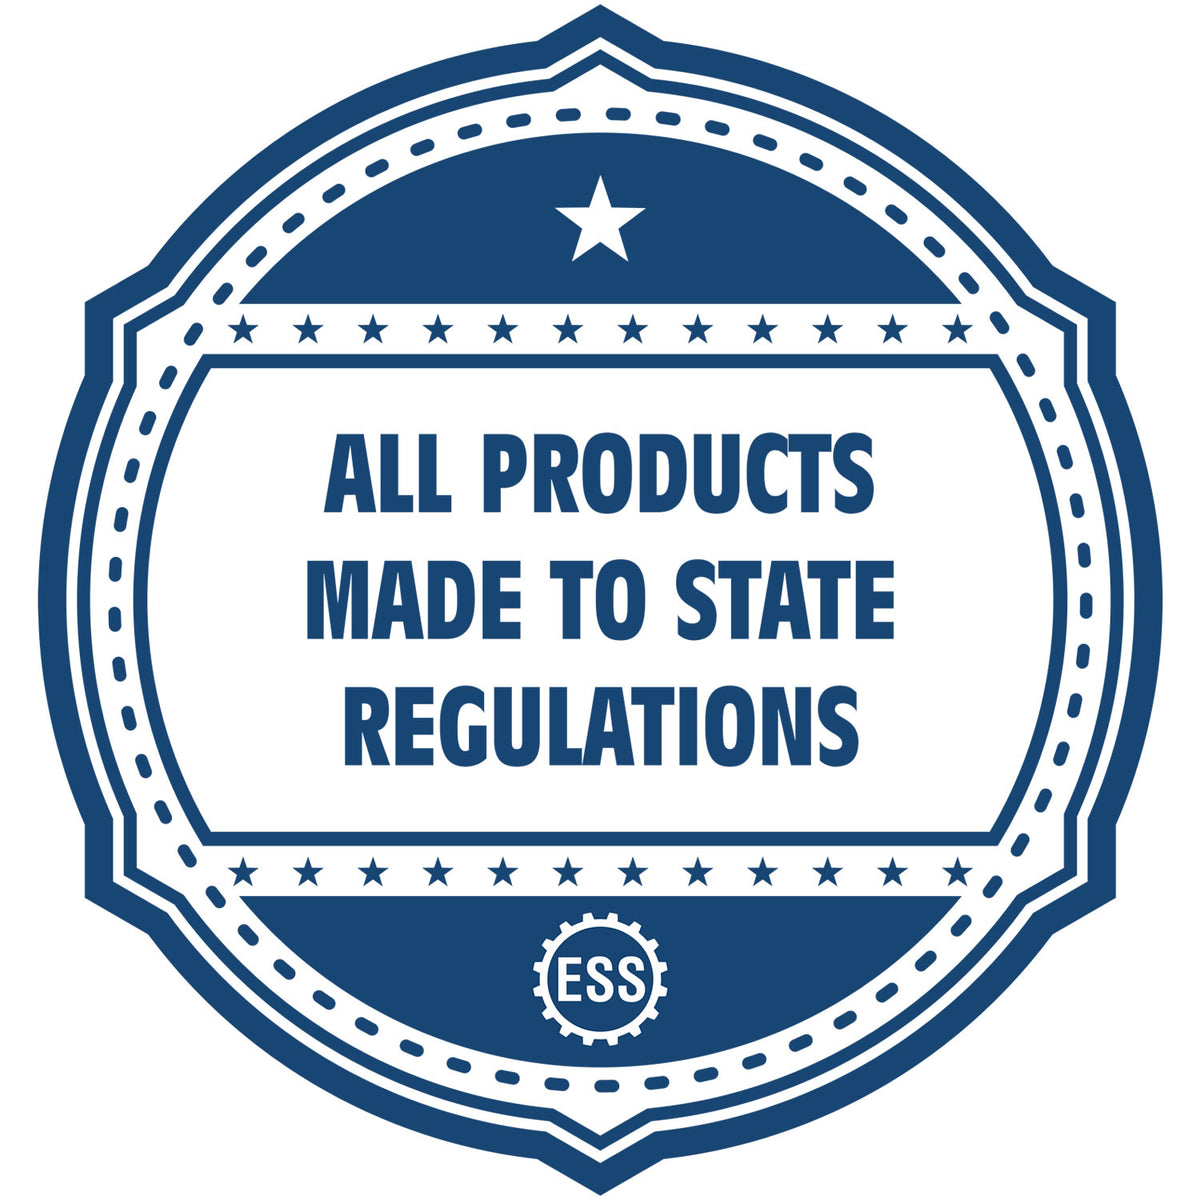 An icon or badge element for the MaxLight Premium Pre-Inked New York State Seal Notarial Stamp showing that this product is made in compliance with state regulations.